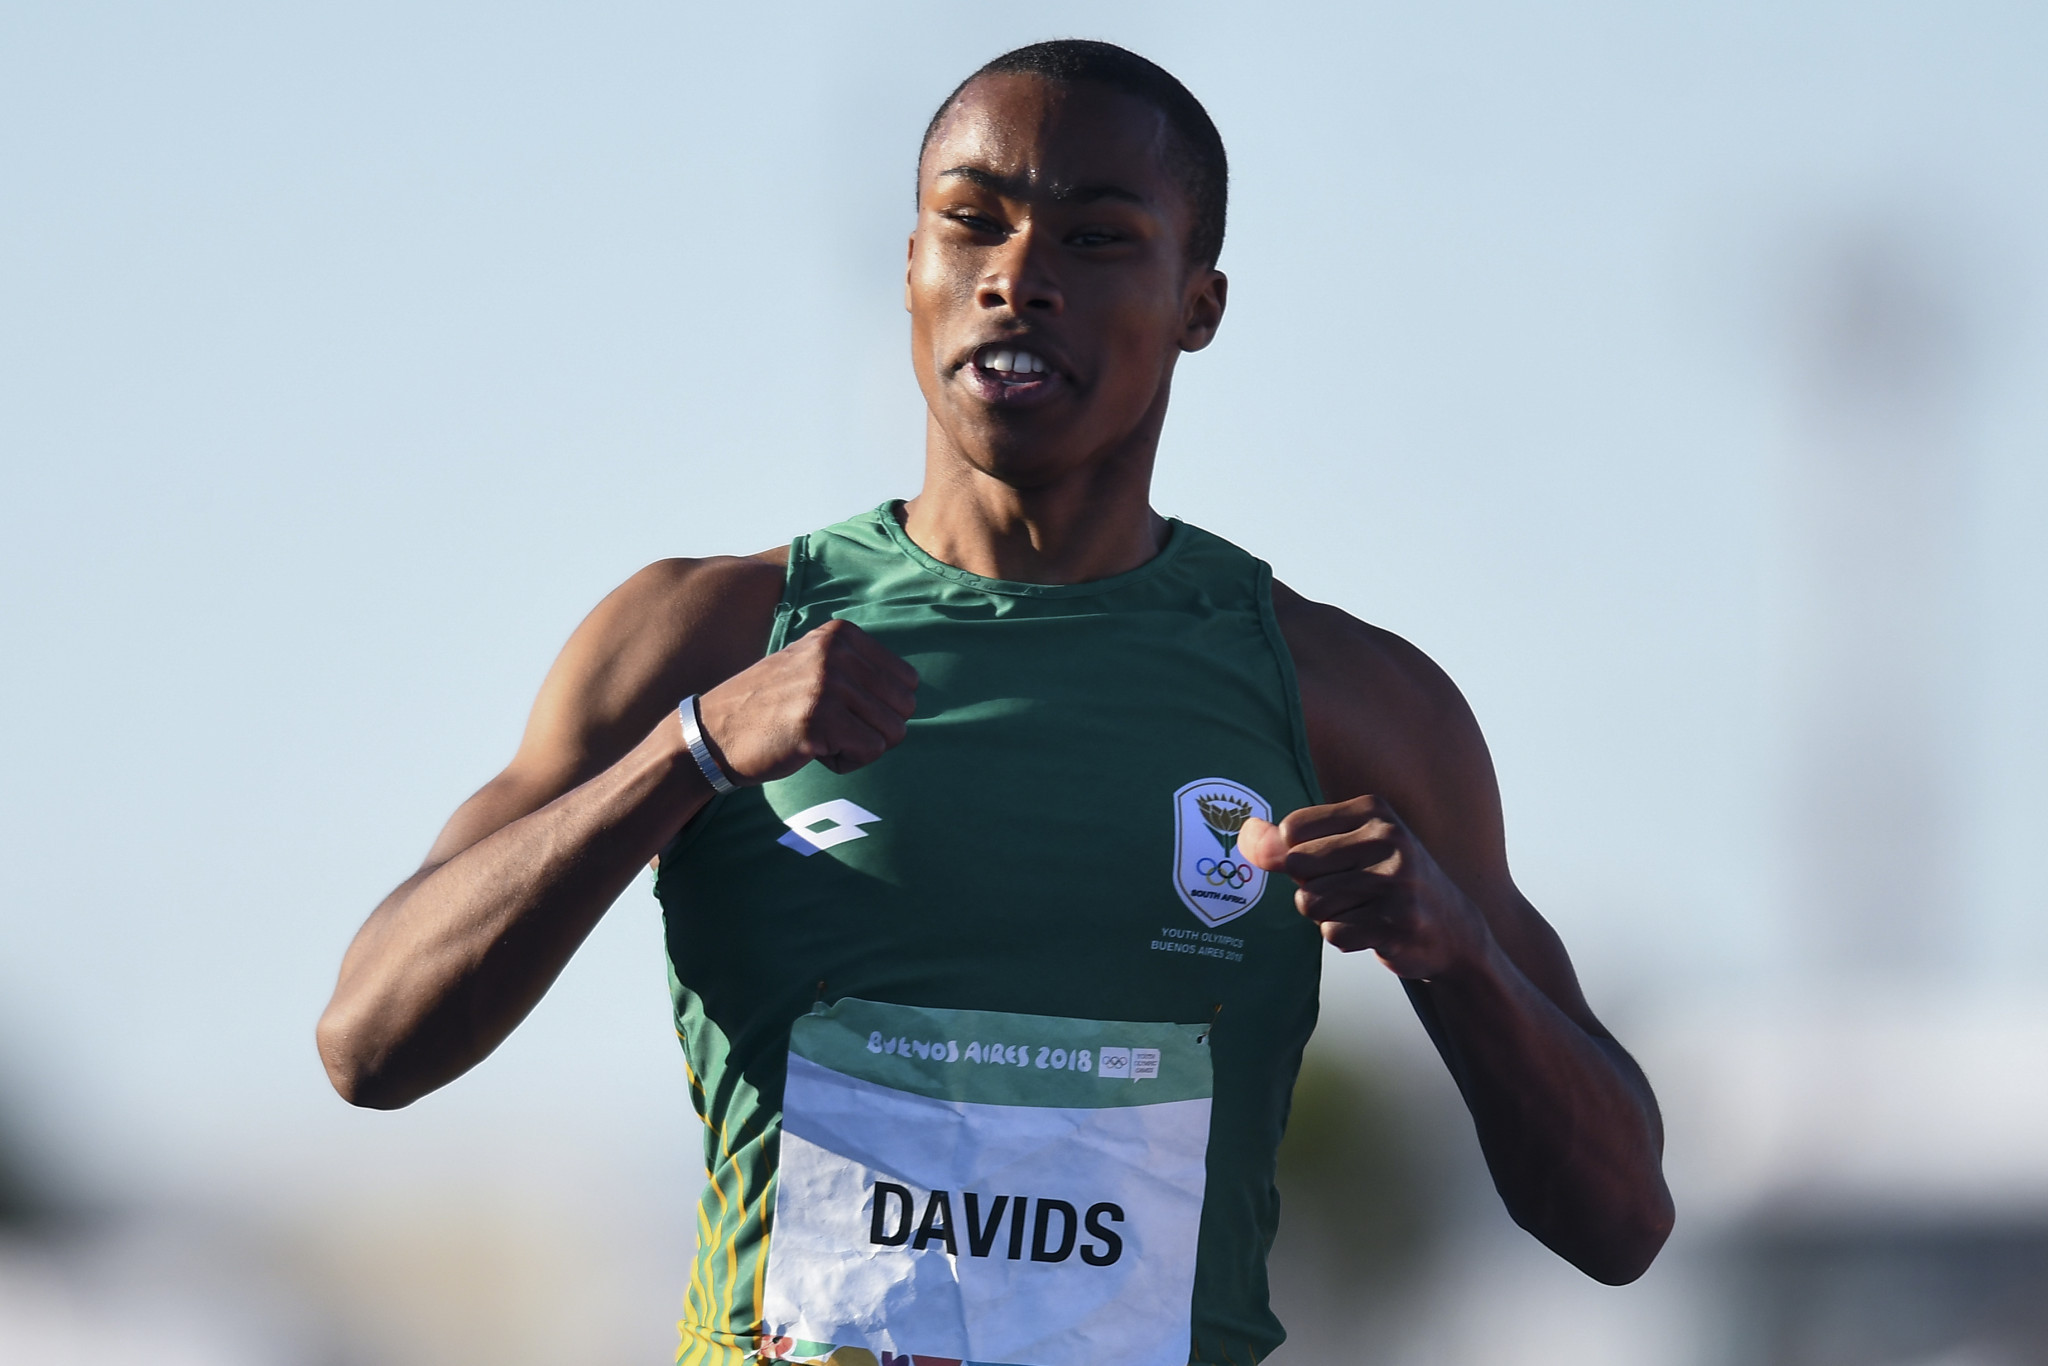 Youth Olympics champion Davids eager to win gold at Chengdu 2021 World University Games